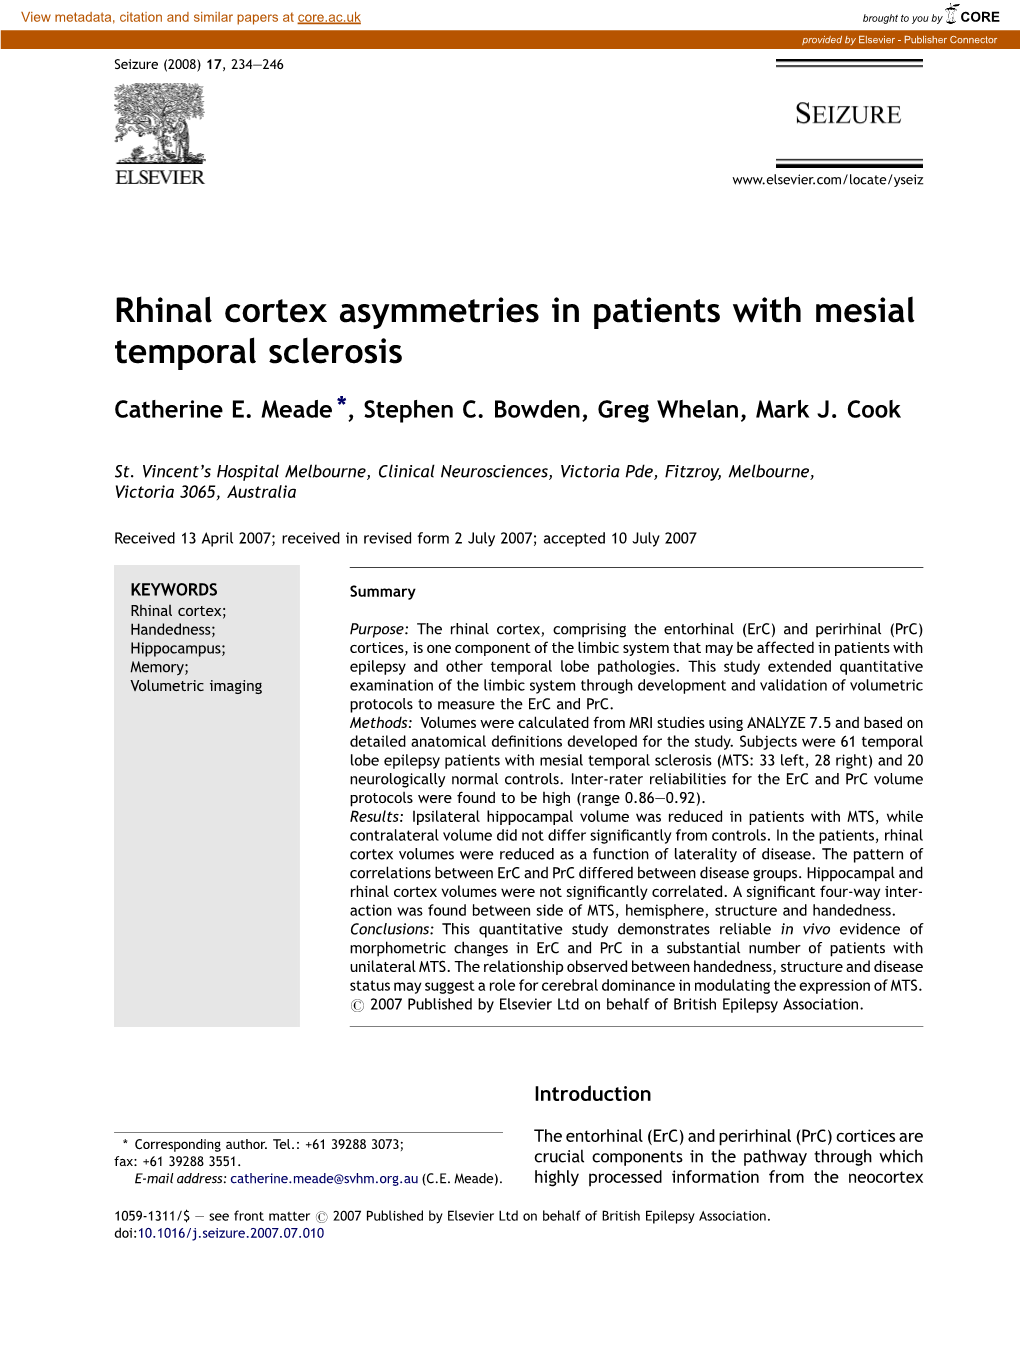 Rhinal Cortex Asymmetries in Patients with Mesial Temporal Sclerosis